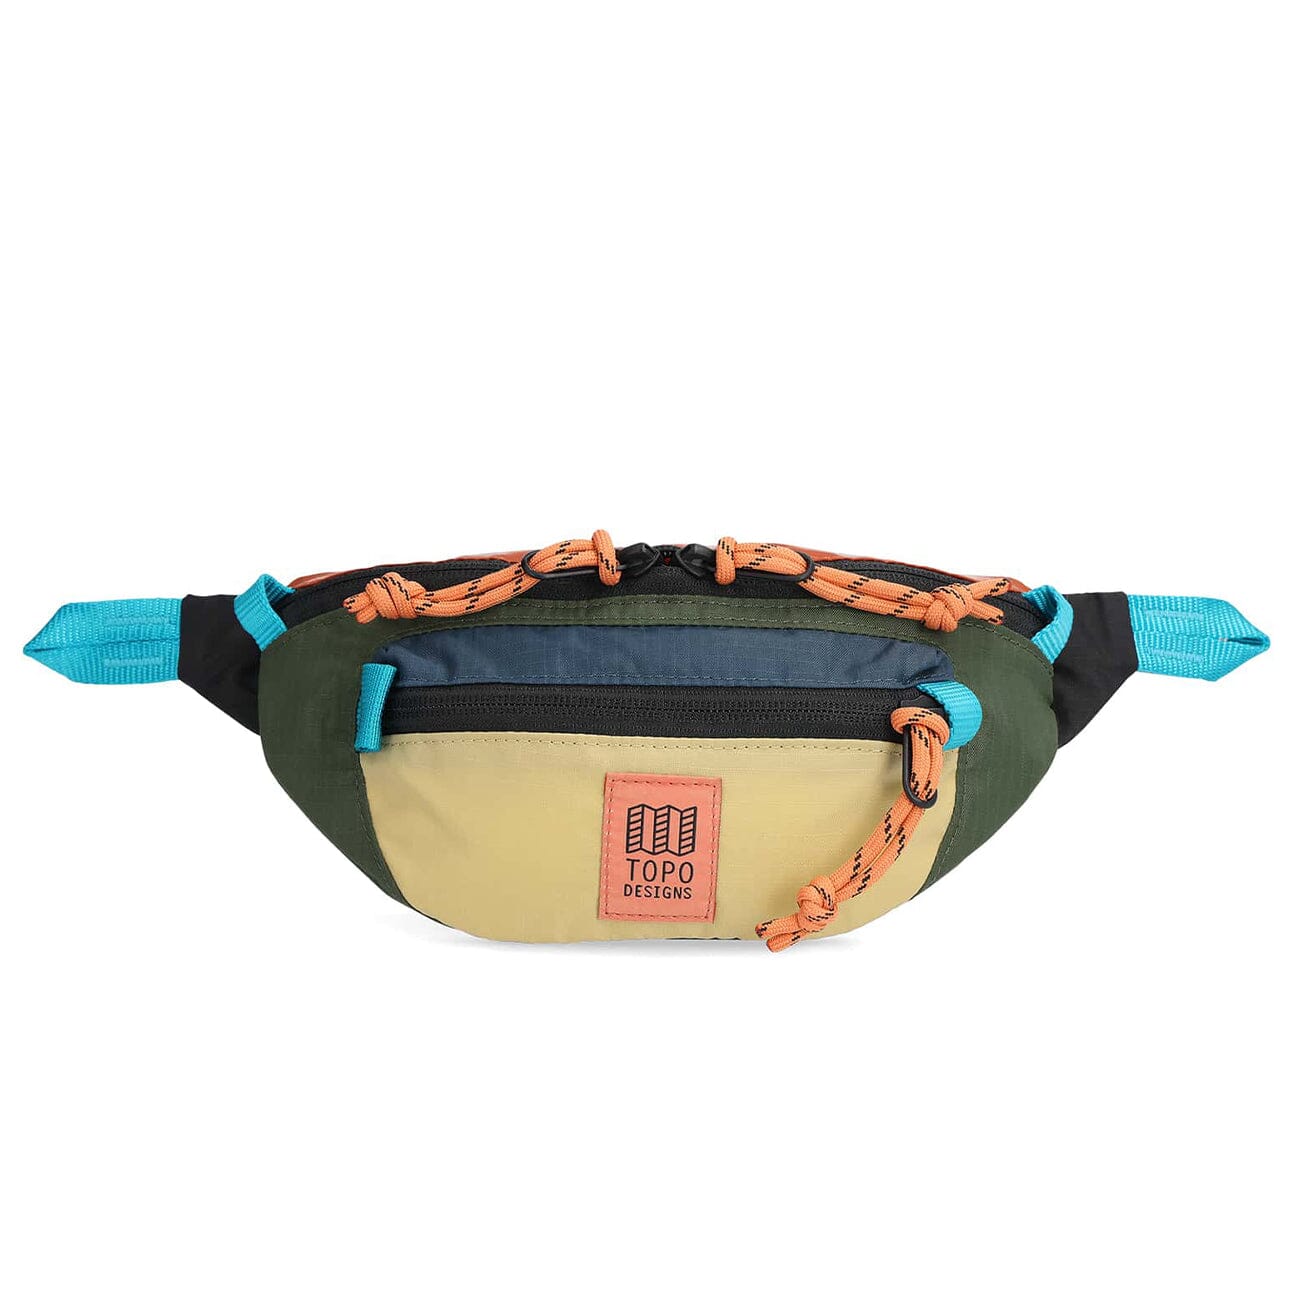 topo designs mountain waist pack olive and hemp front view